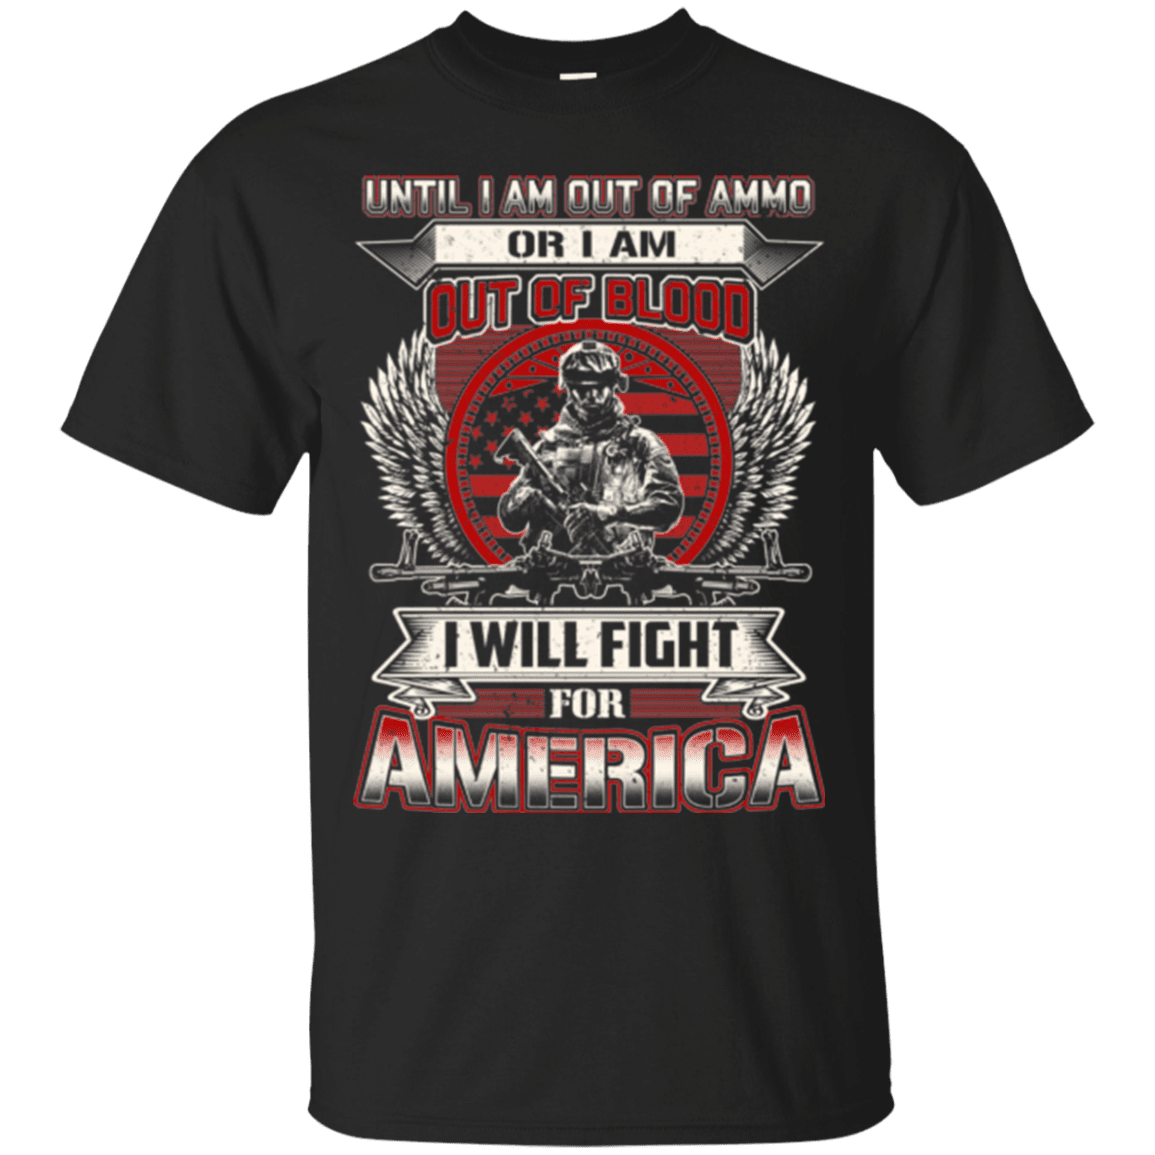 Military T-Shirt "I WILL FIRE FOR AMERICA"-TShirt-General-Veterans Nation